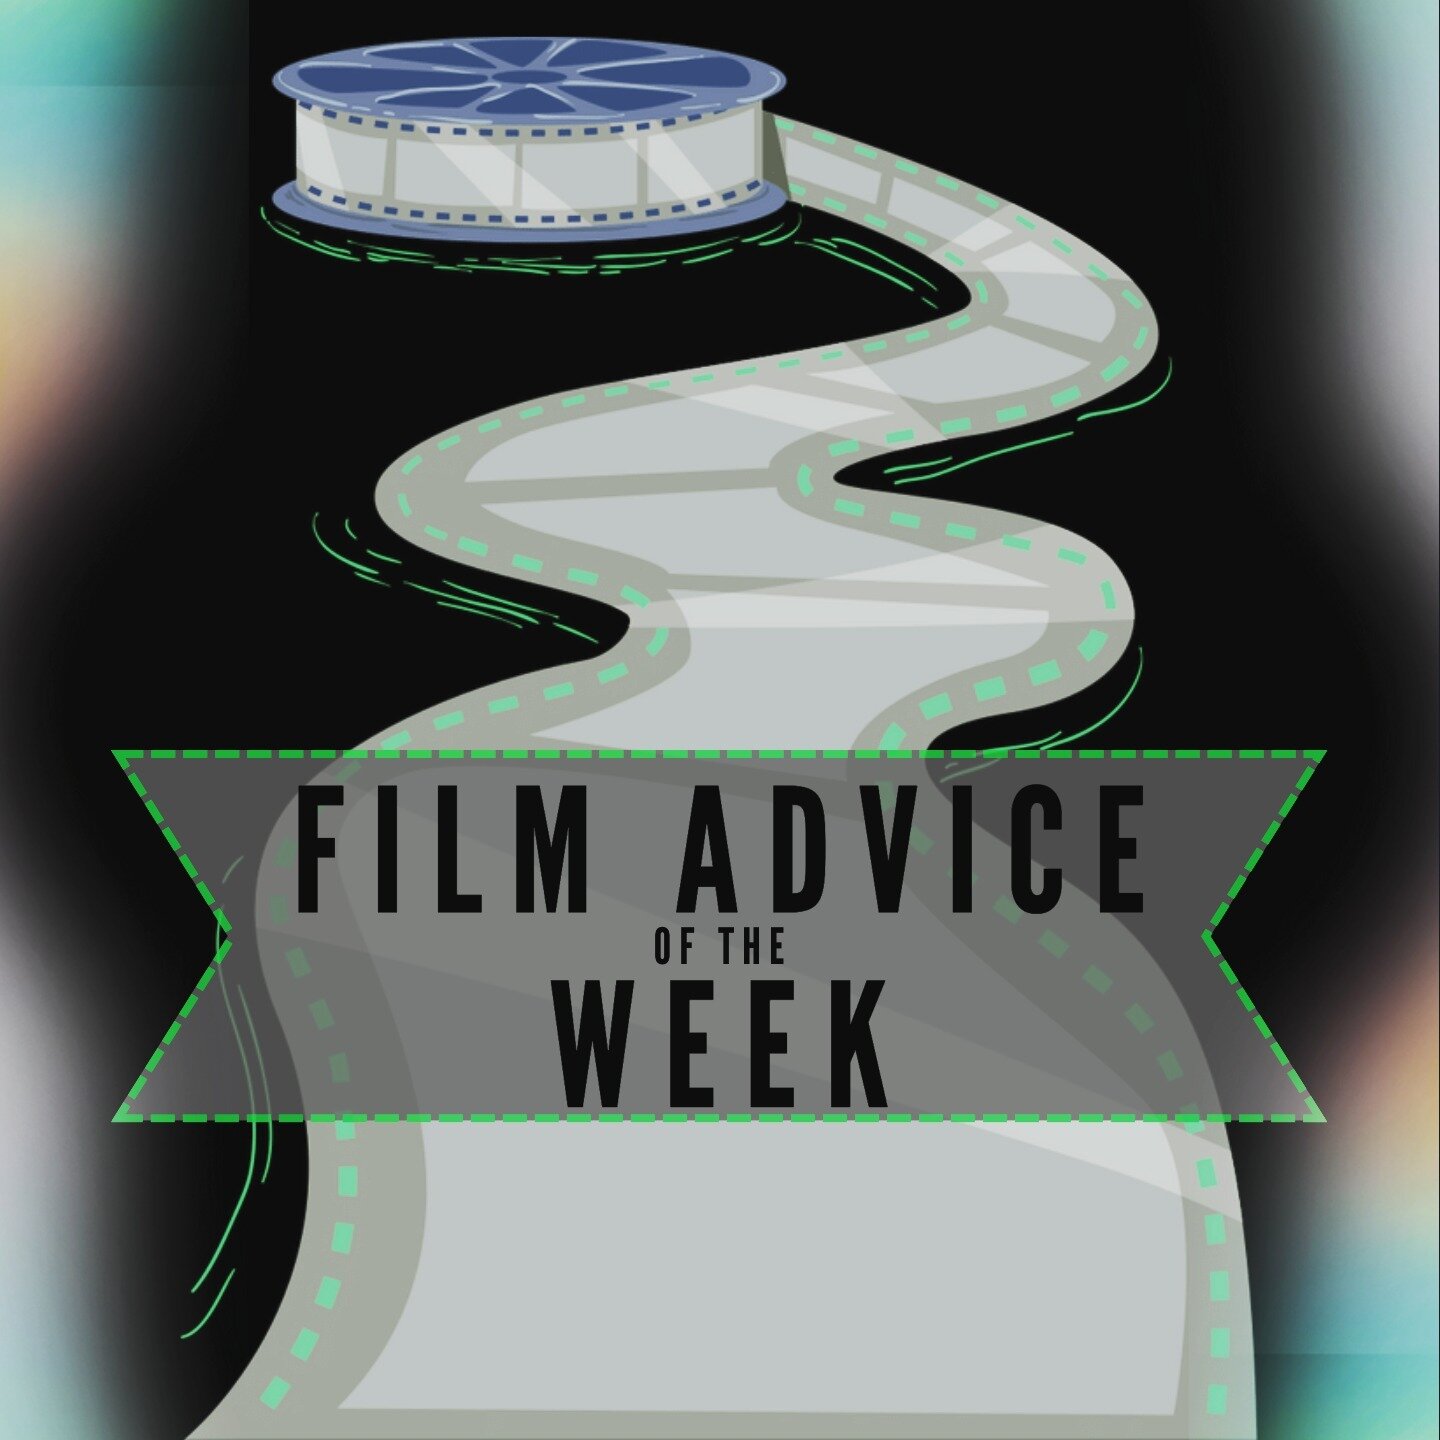 On today's Film Advice of the Week: Did you know that scripts have revision colors? While the initial draft is usually labeled &quot;WHITE,&quot; the revisions will take on different colors to indicate which revision is being used or read. Colors can